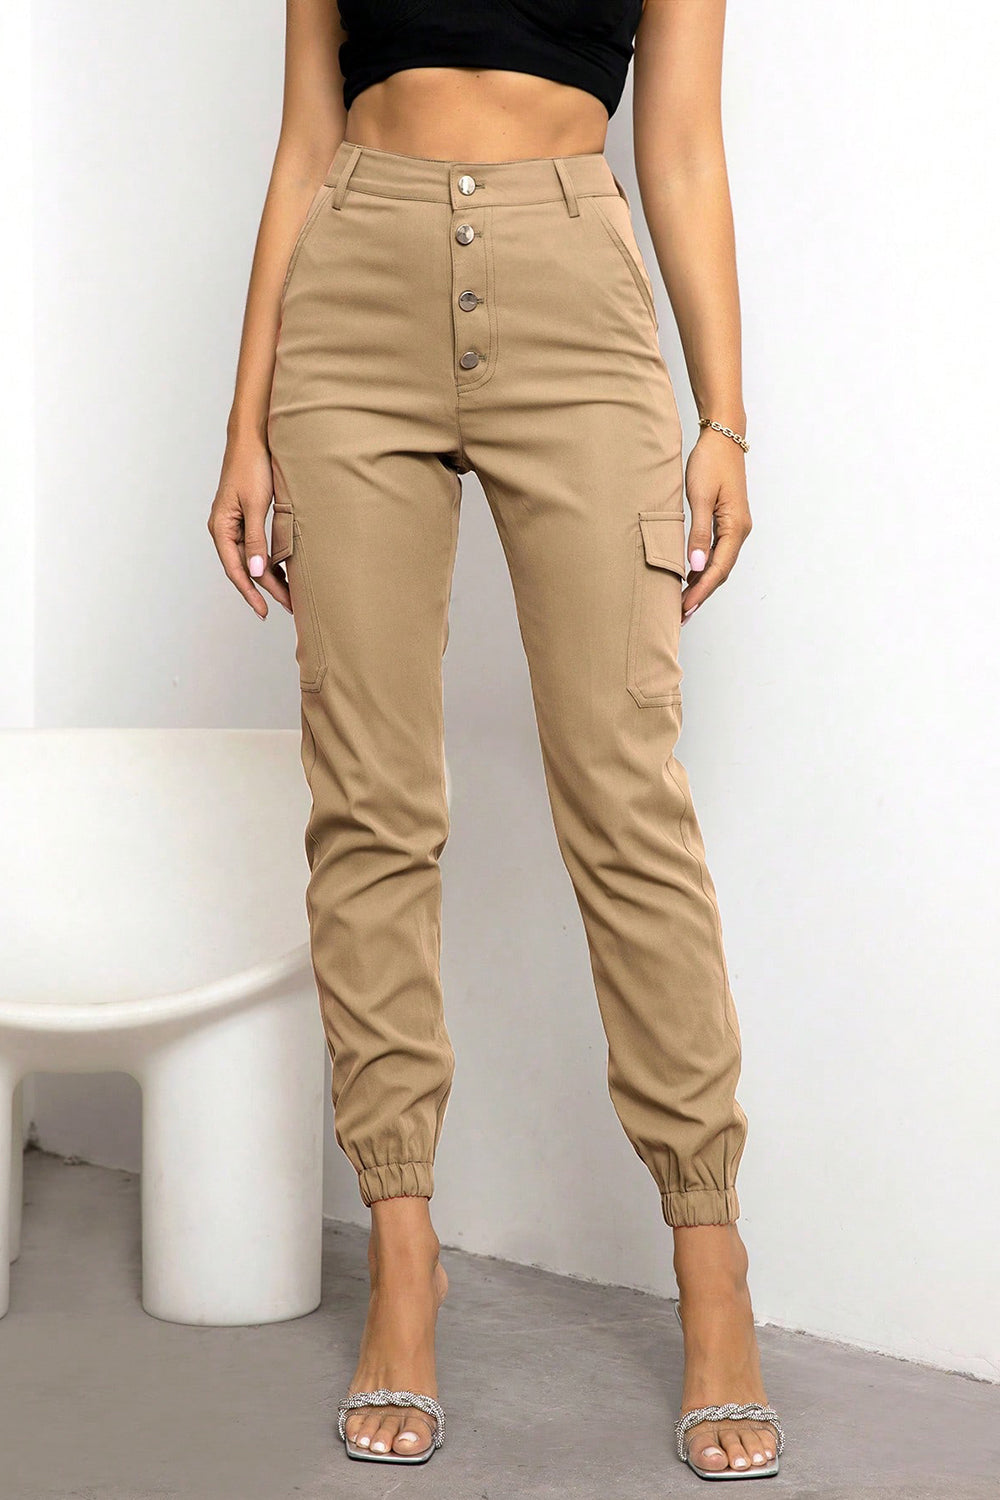 Button Fly Cargo Pants - Brown / XS - Bottoms - Pants - 5 - 2024